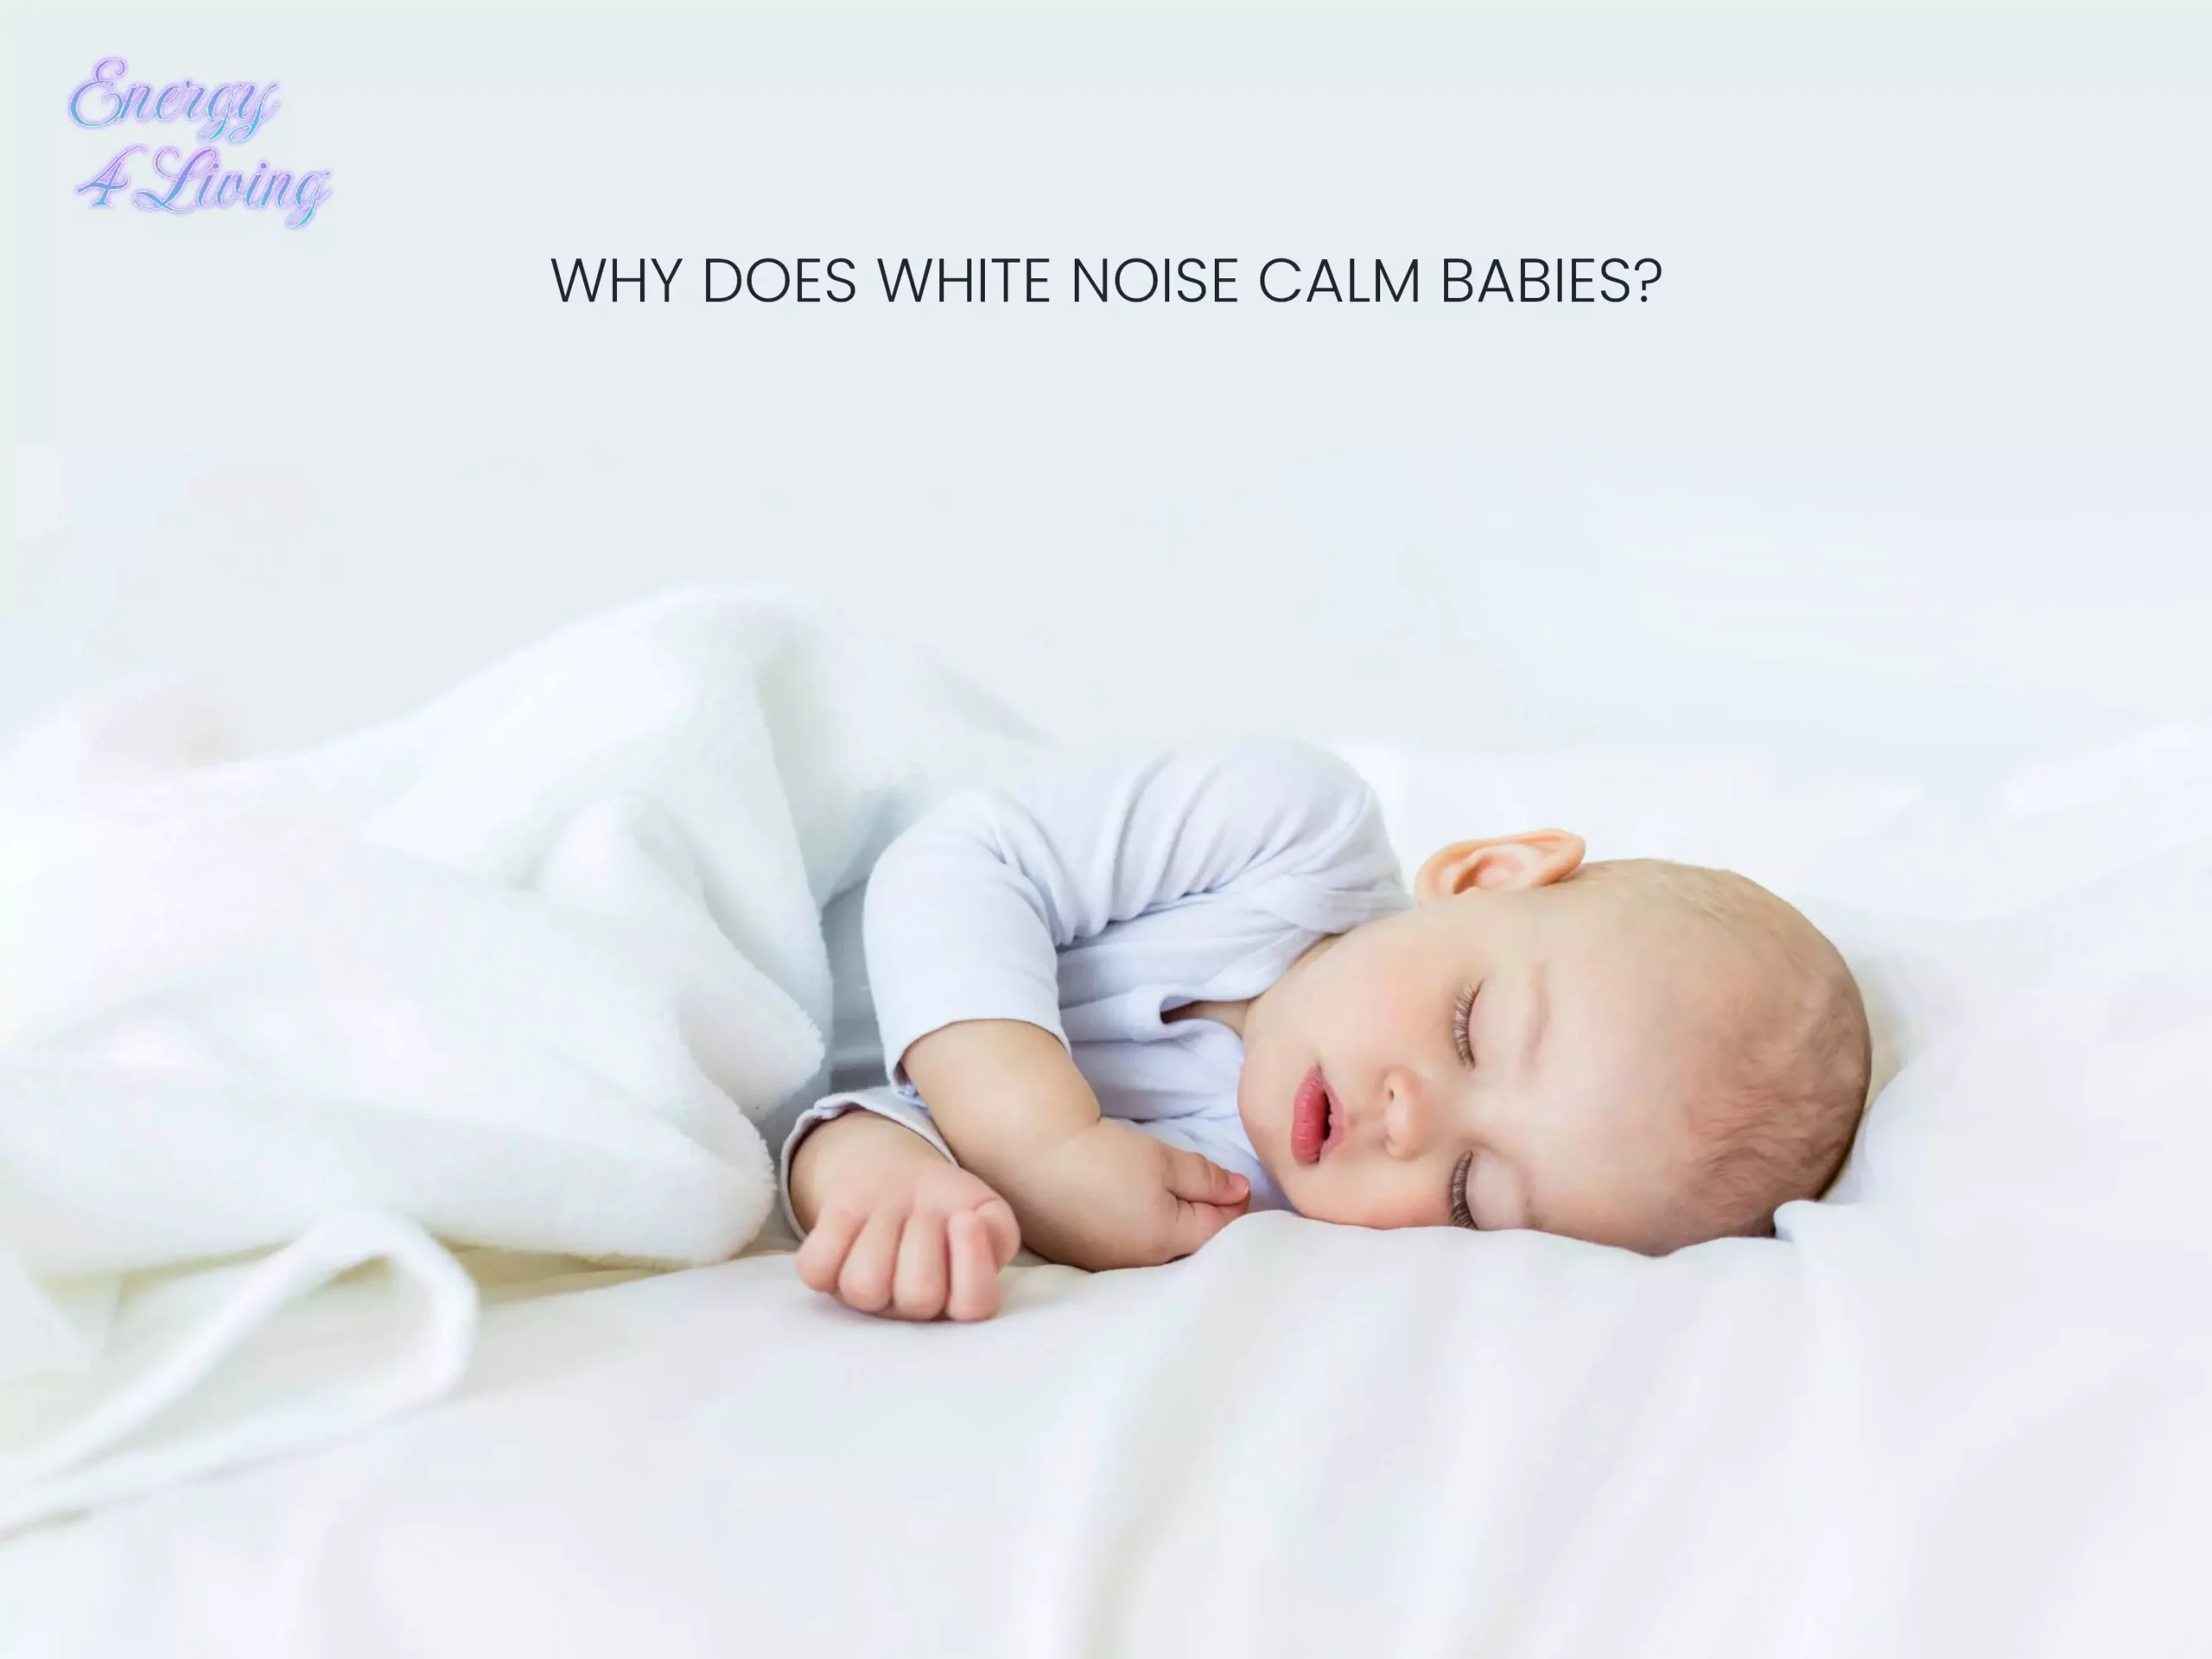 Why does white noise calm babies?